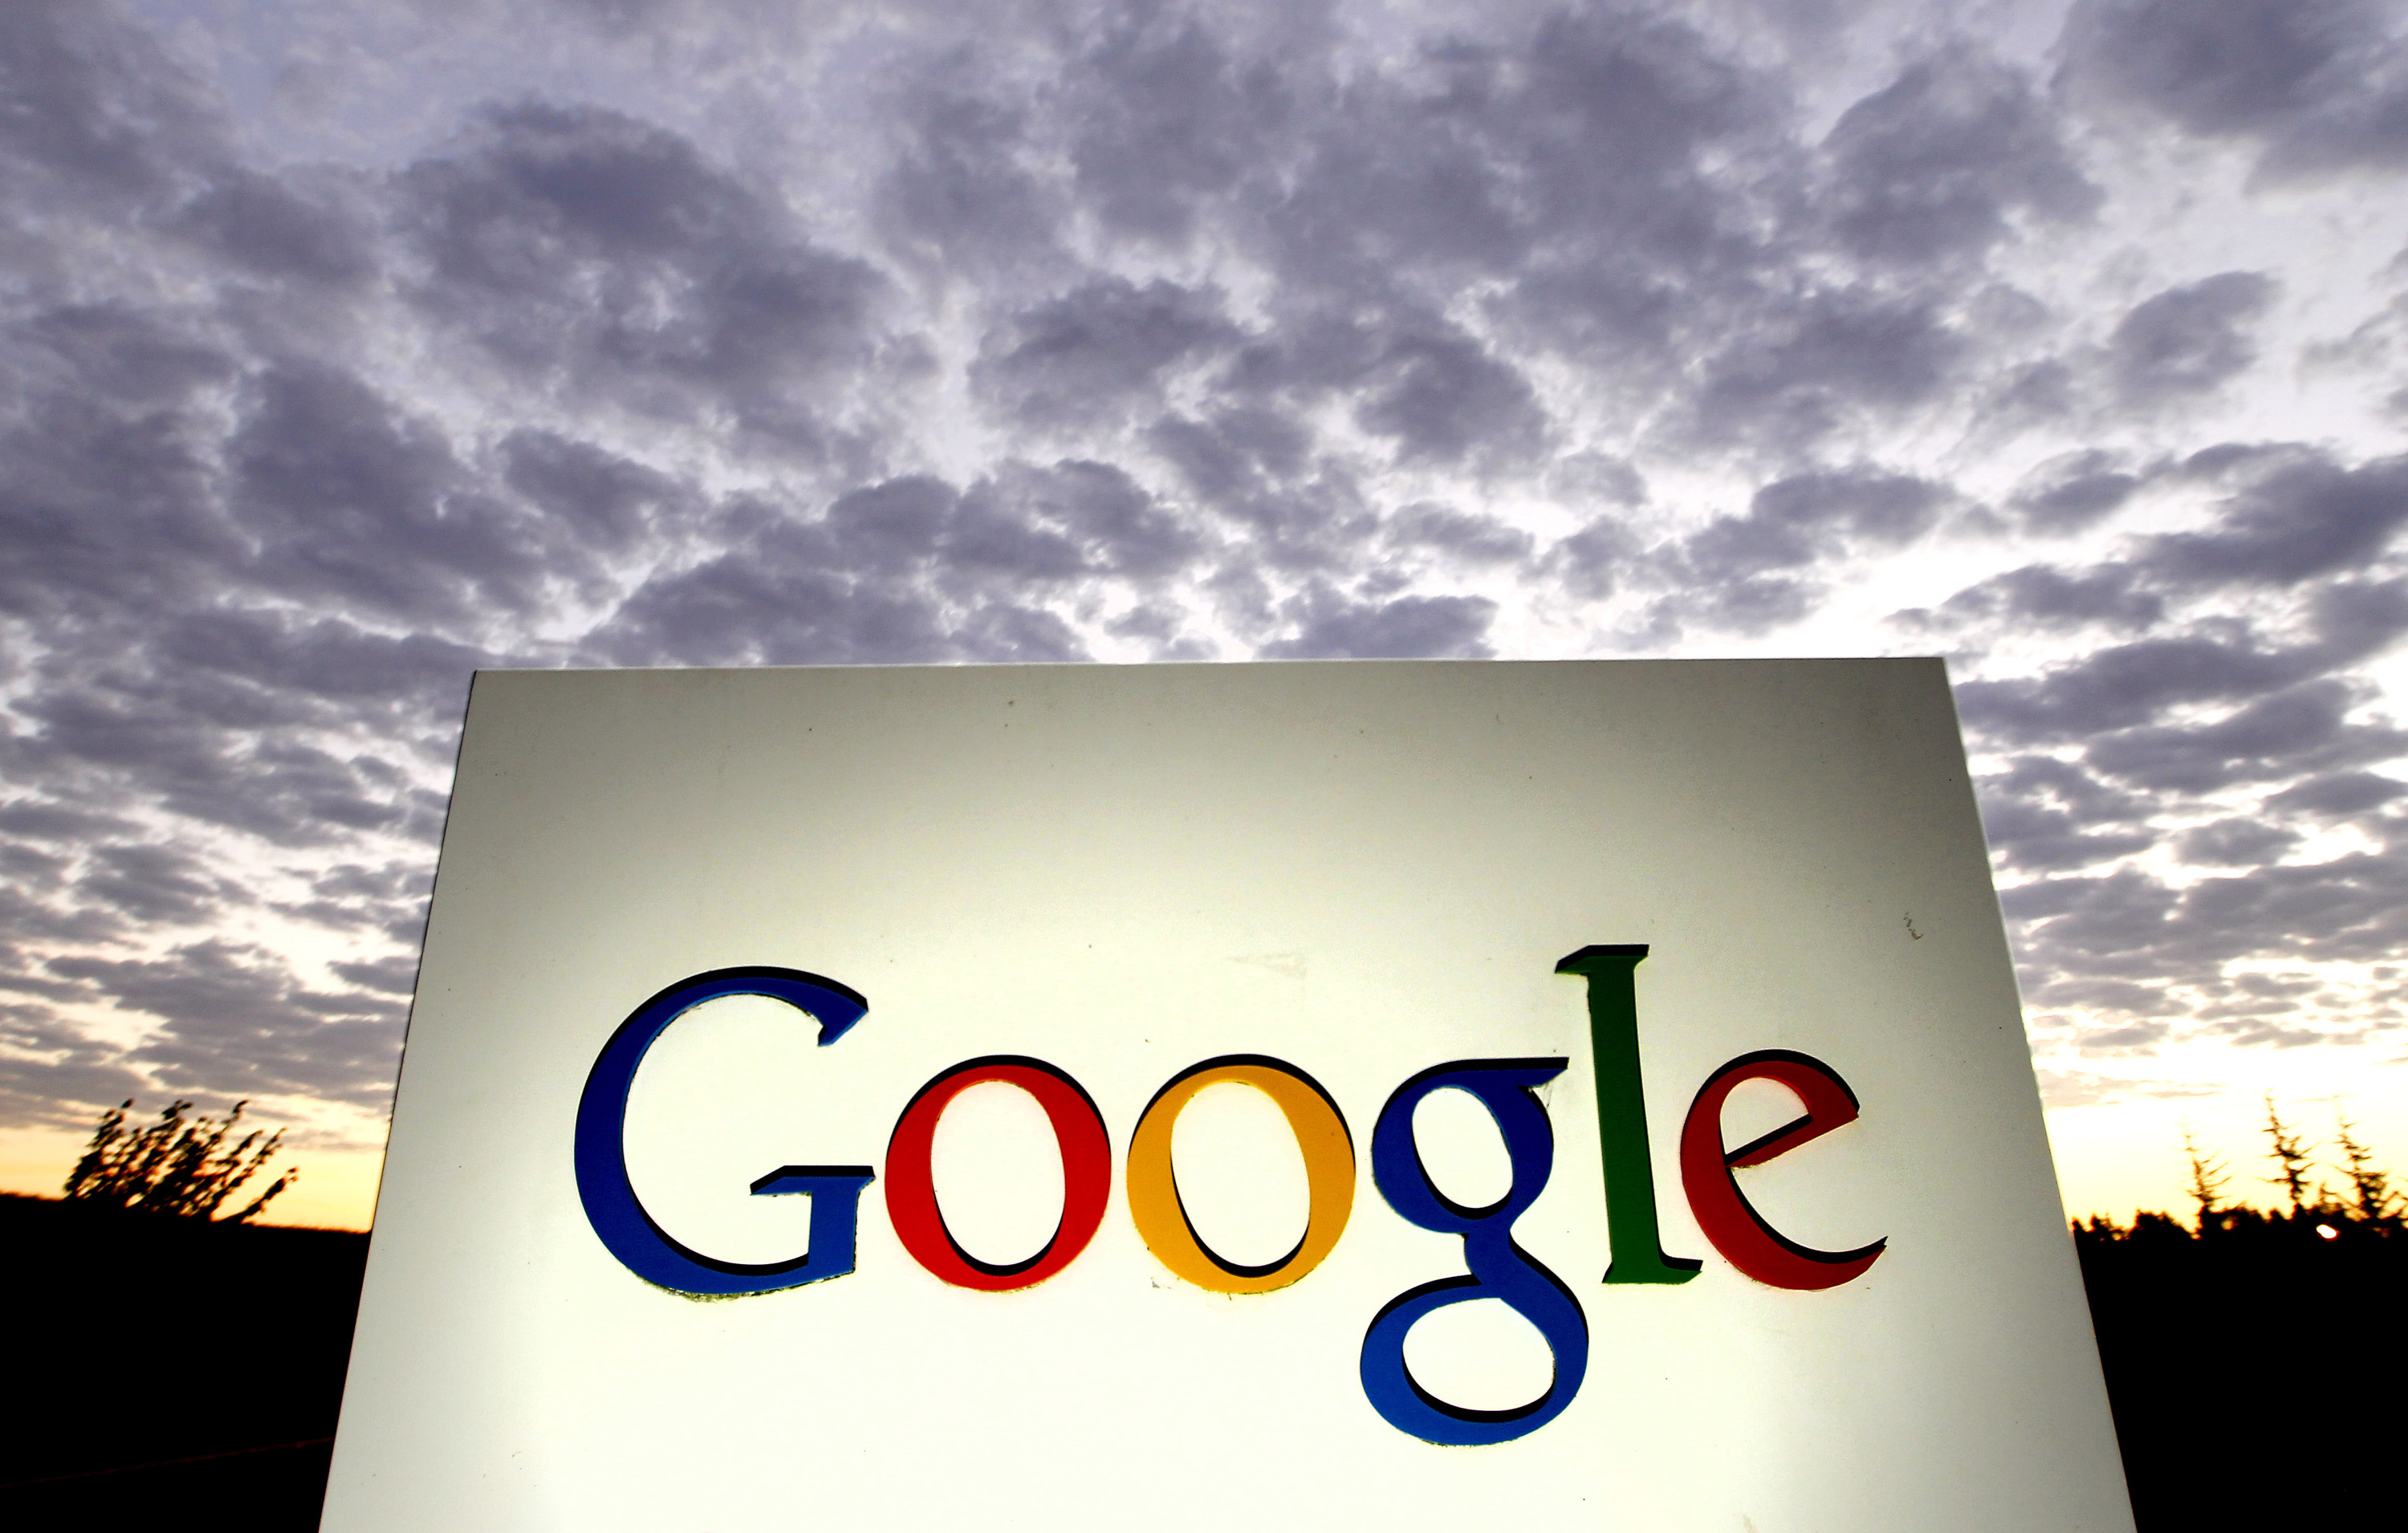 Signage is displayed outside the Google Inc. headquarters in Mountain View, California, on Oct. 13, 2010. (Bloomberg/Getty Images)